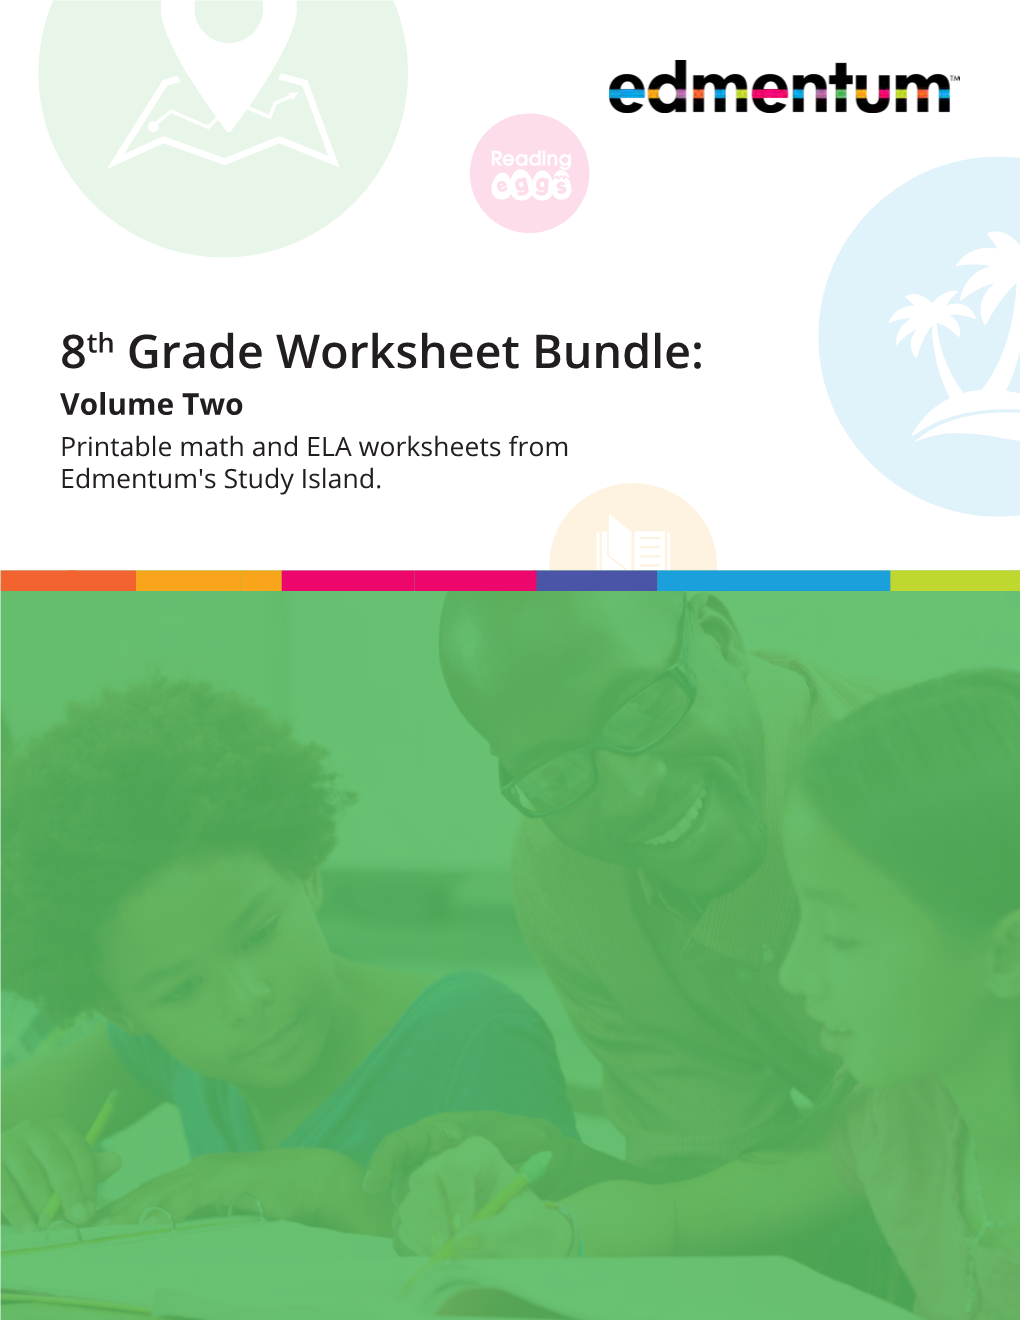 8Th Grade Worksheet Bundle Volume Two Printable Math And ELA Worksheets From Edmentum s Study